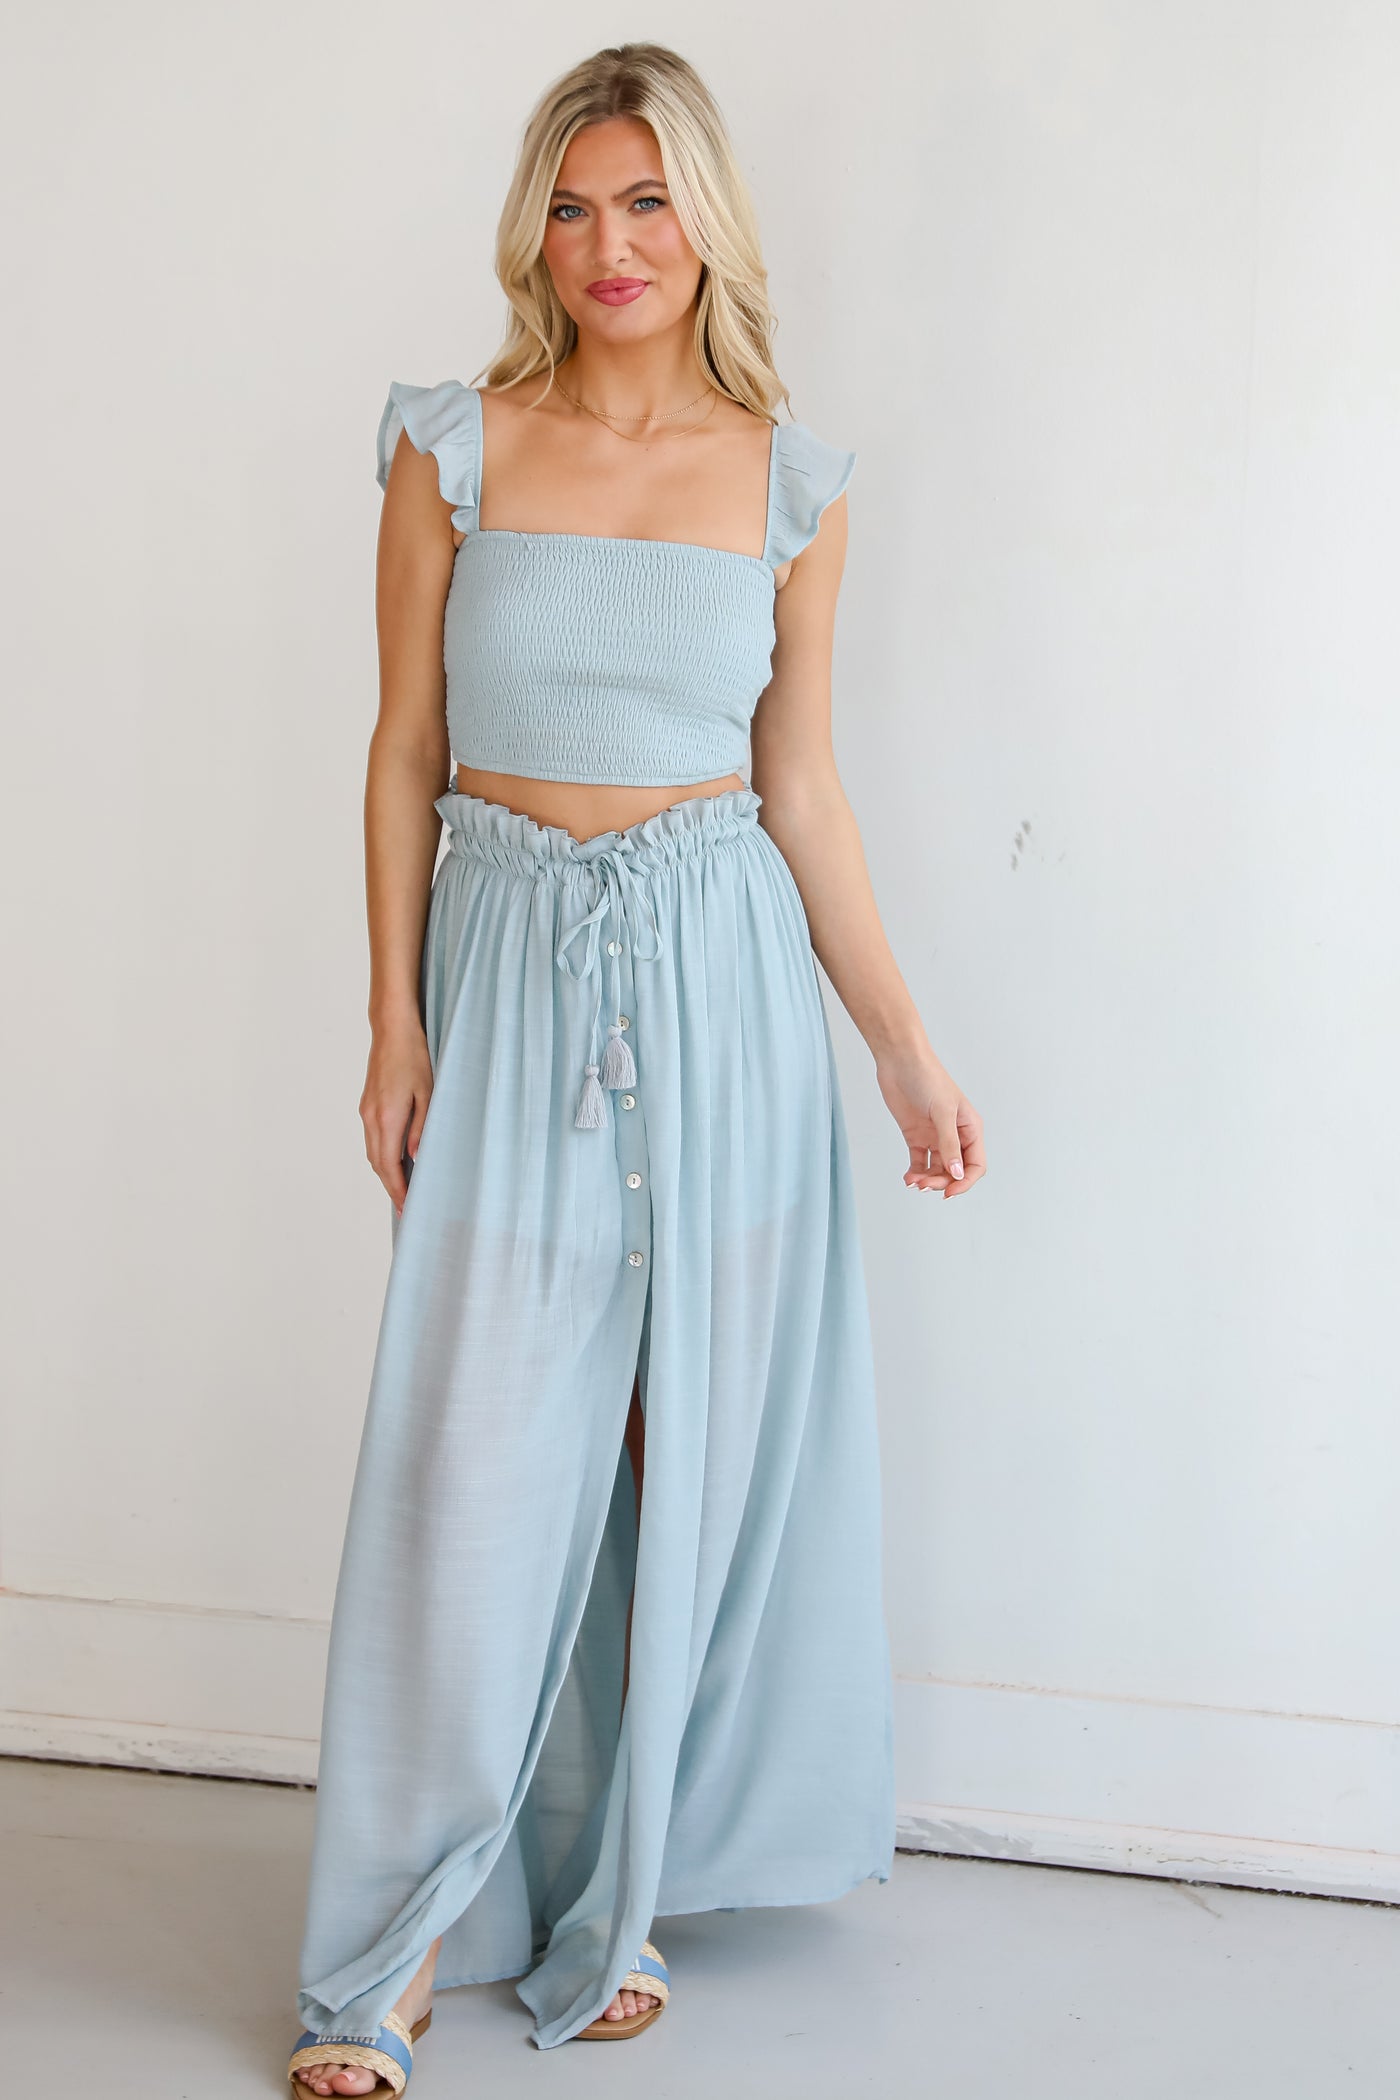 Sunny Impression Blue Maxi Skirt cute vacation outfits for women